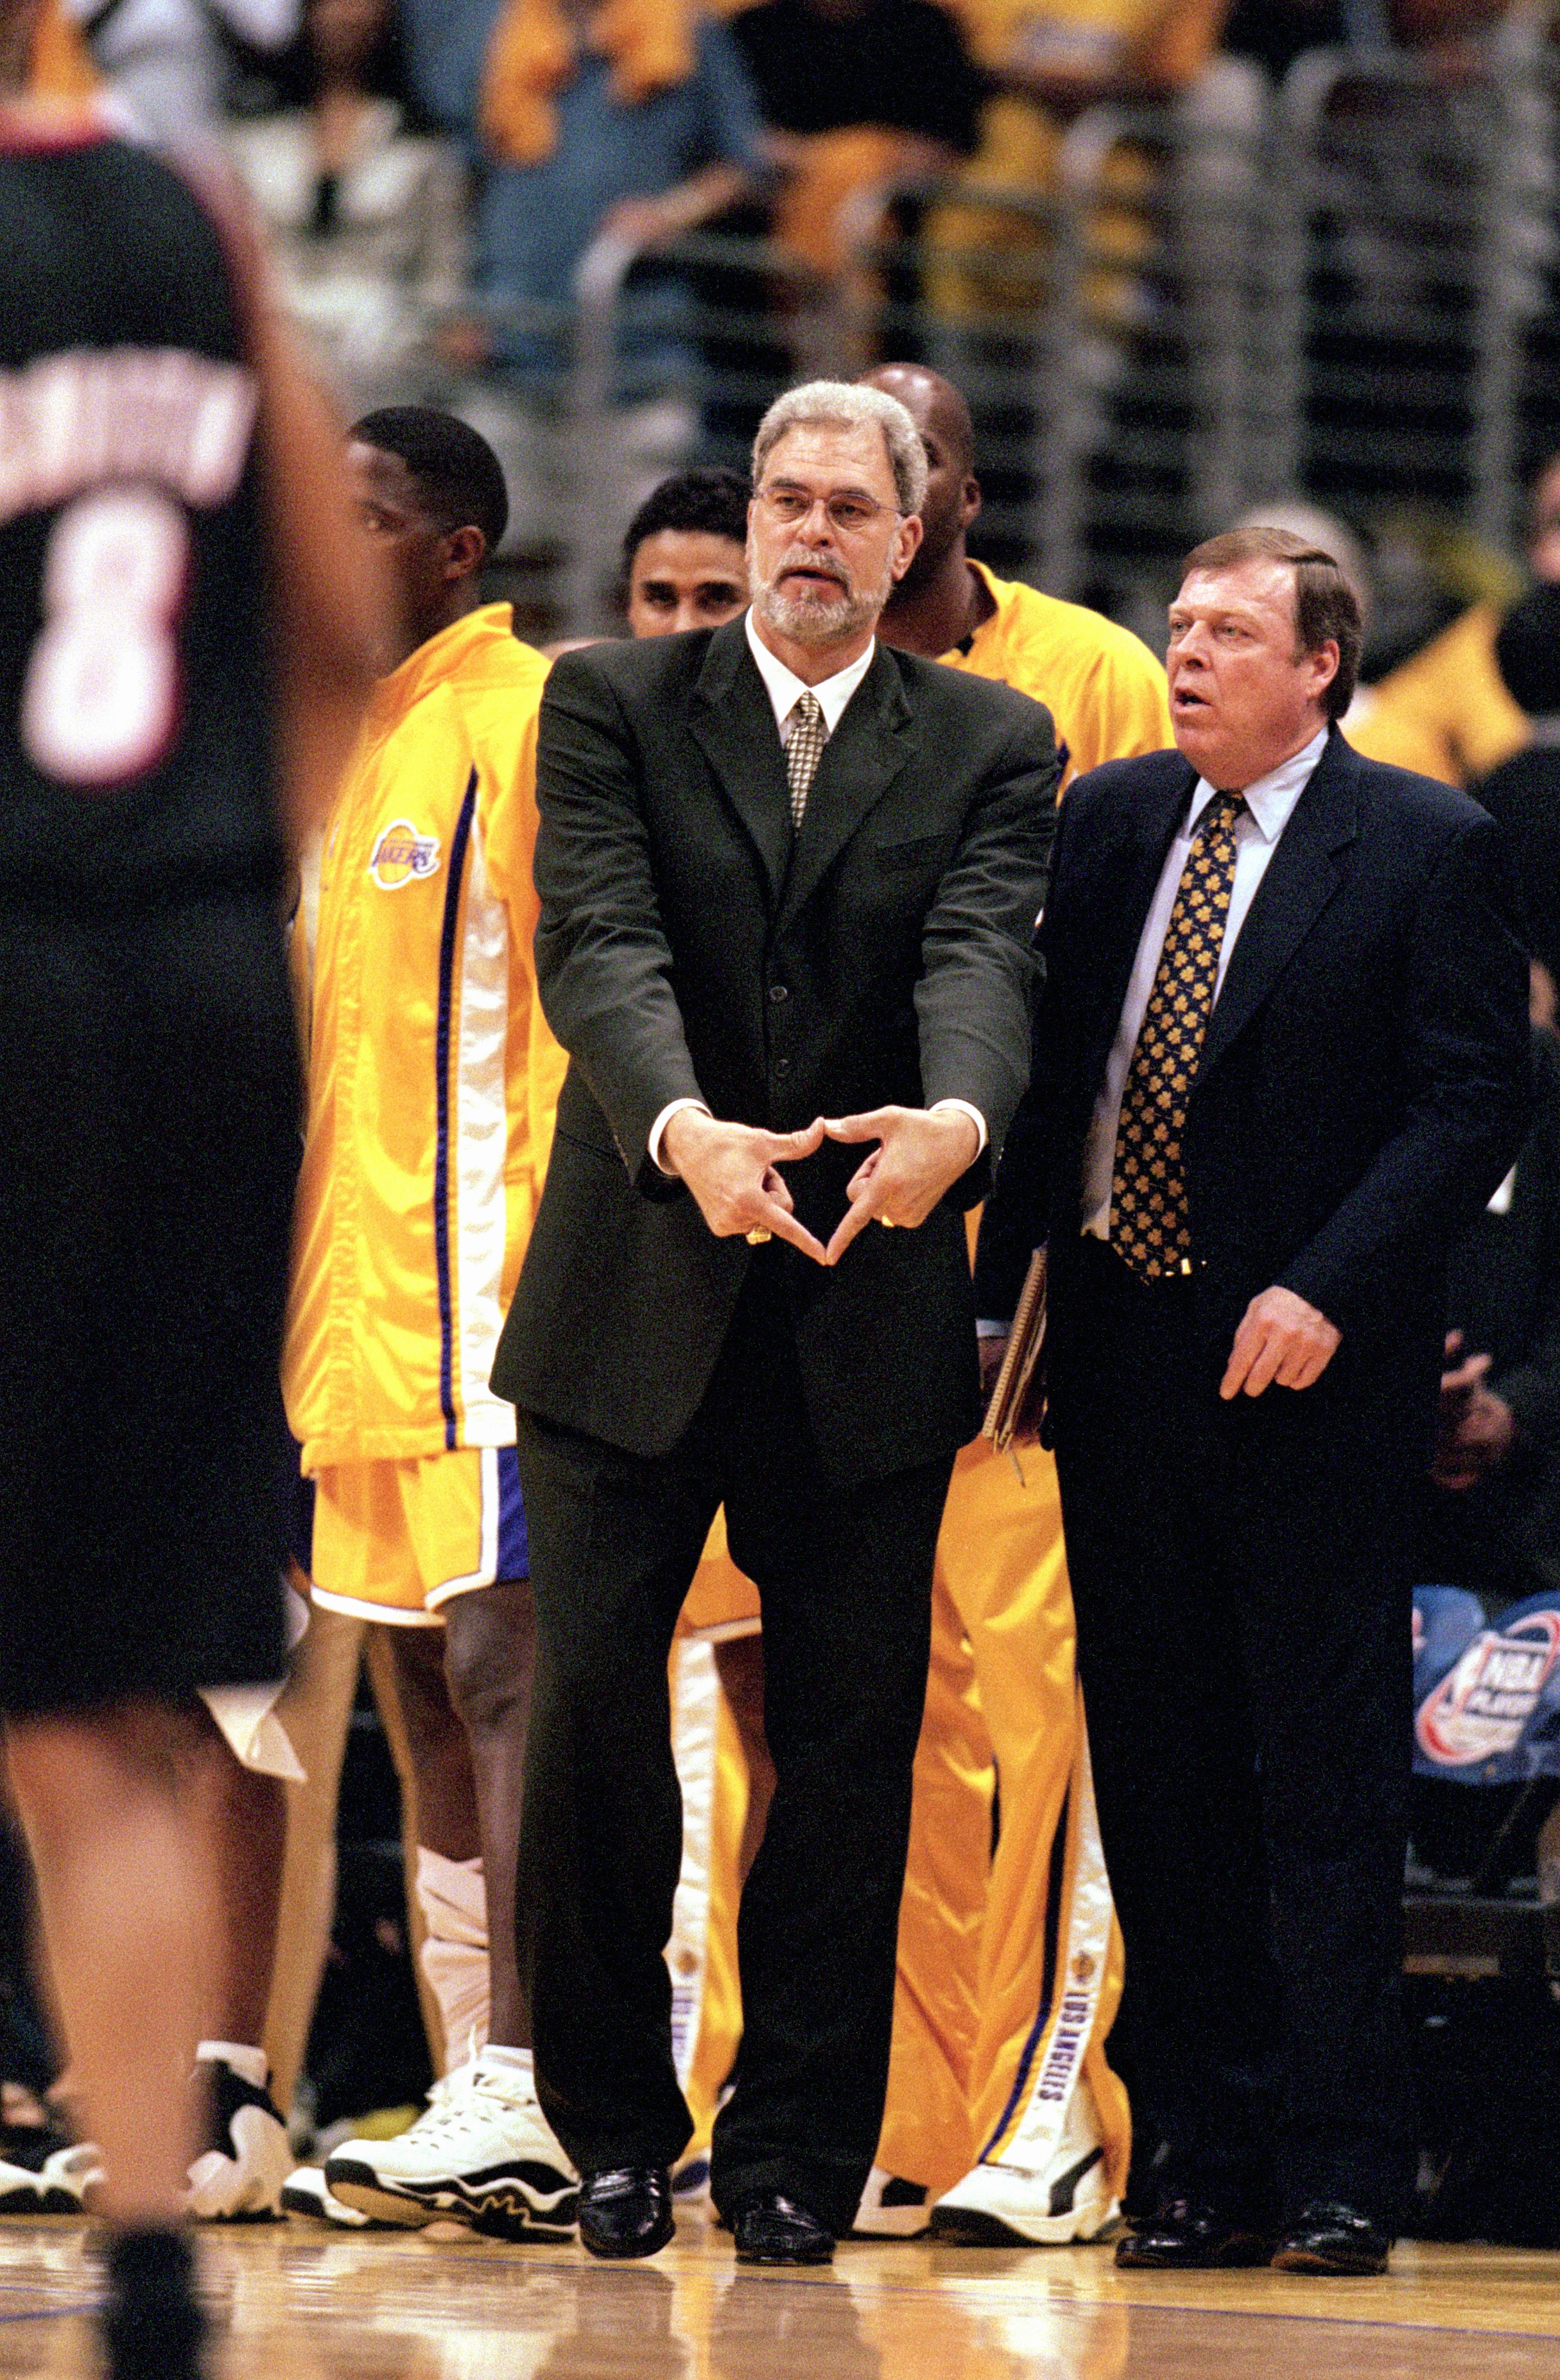 LOS ANGELES - JUNE 4:  Head coach Phil Jackson of the Los Angeles Lakers signals triangle defense as assistant coach Frank Hamblen looks on during Game 7 of the Western Conference Finals against the Portland Trail Blazers at Staples Center on June 4, 2000